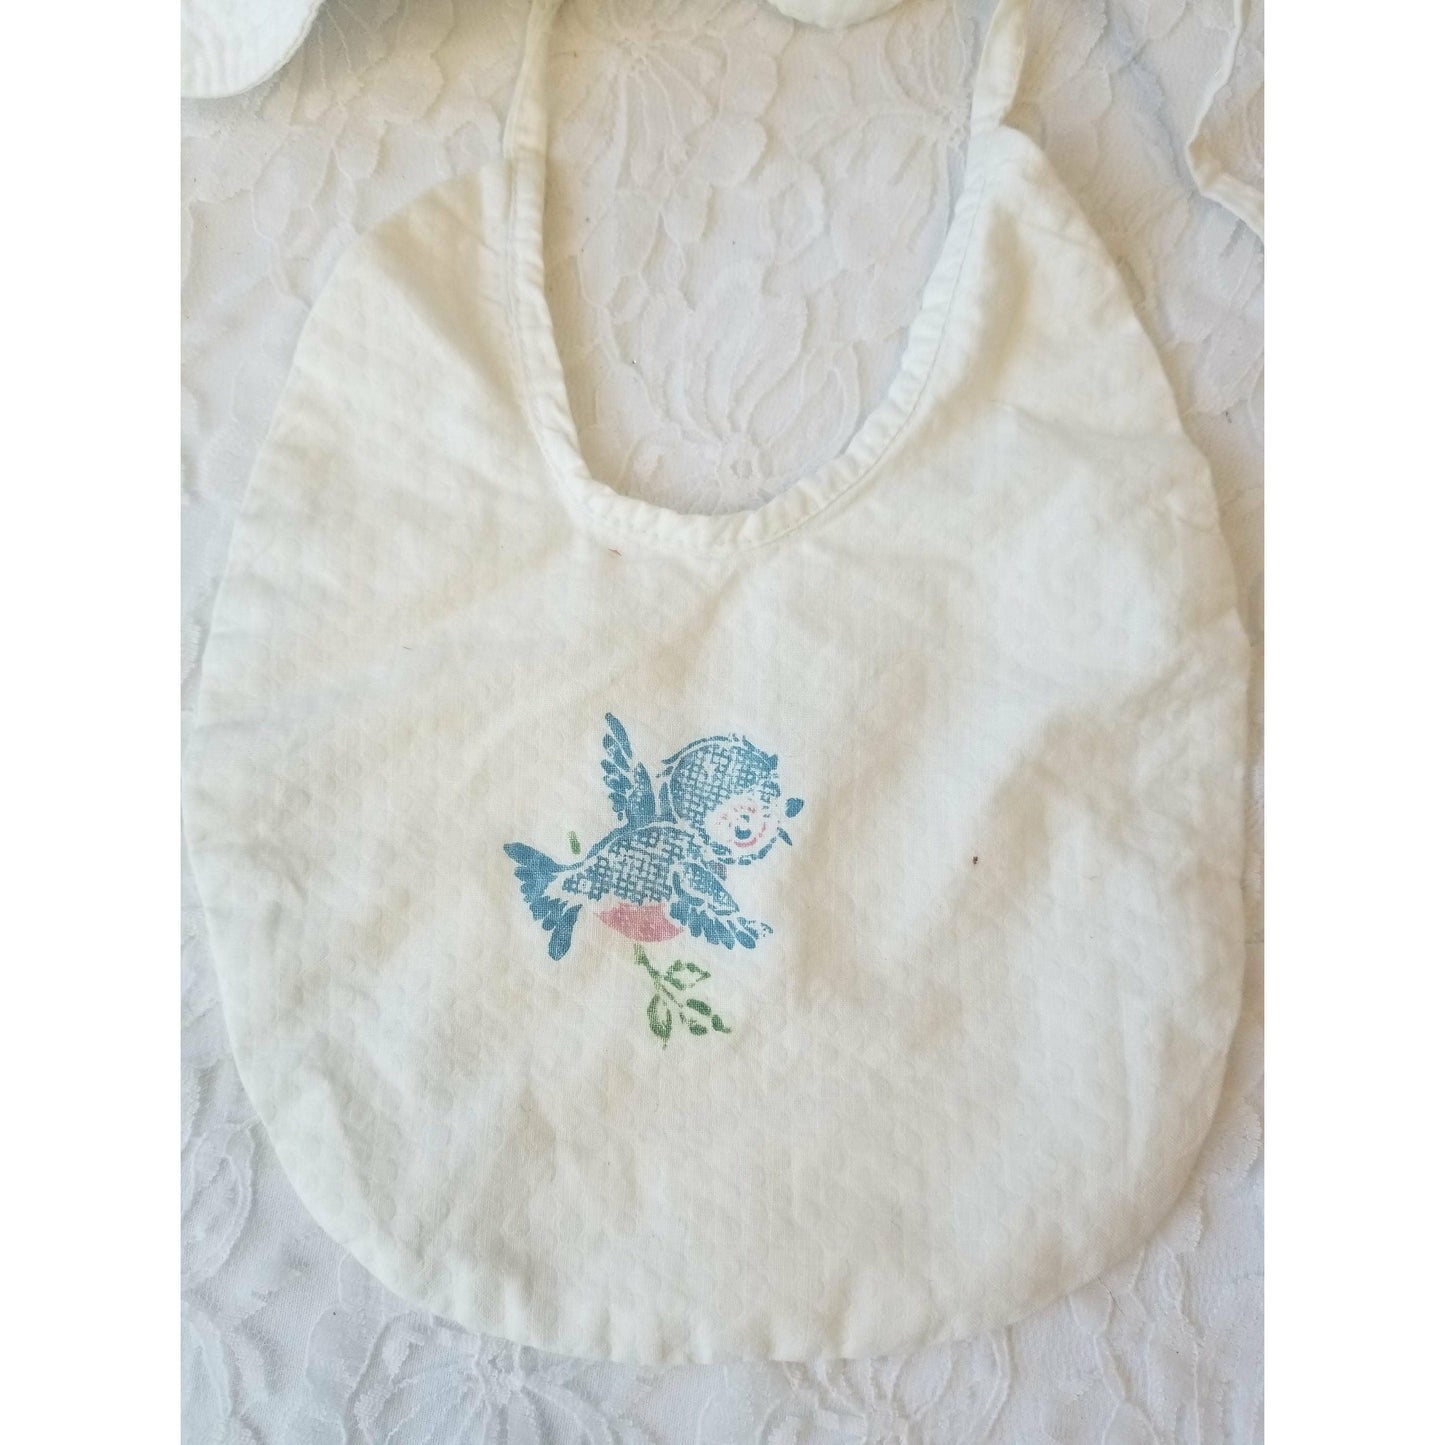 Vintage Baby Seersucker Bib and Bonnet ~ Handmade 1940s with Painted Bluebird and Embroidery